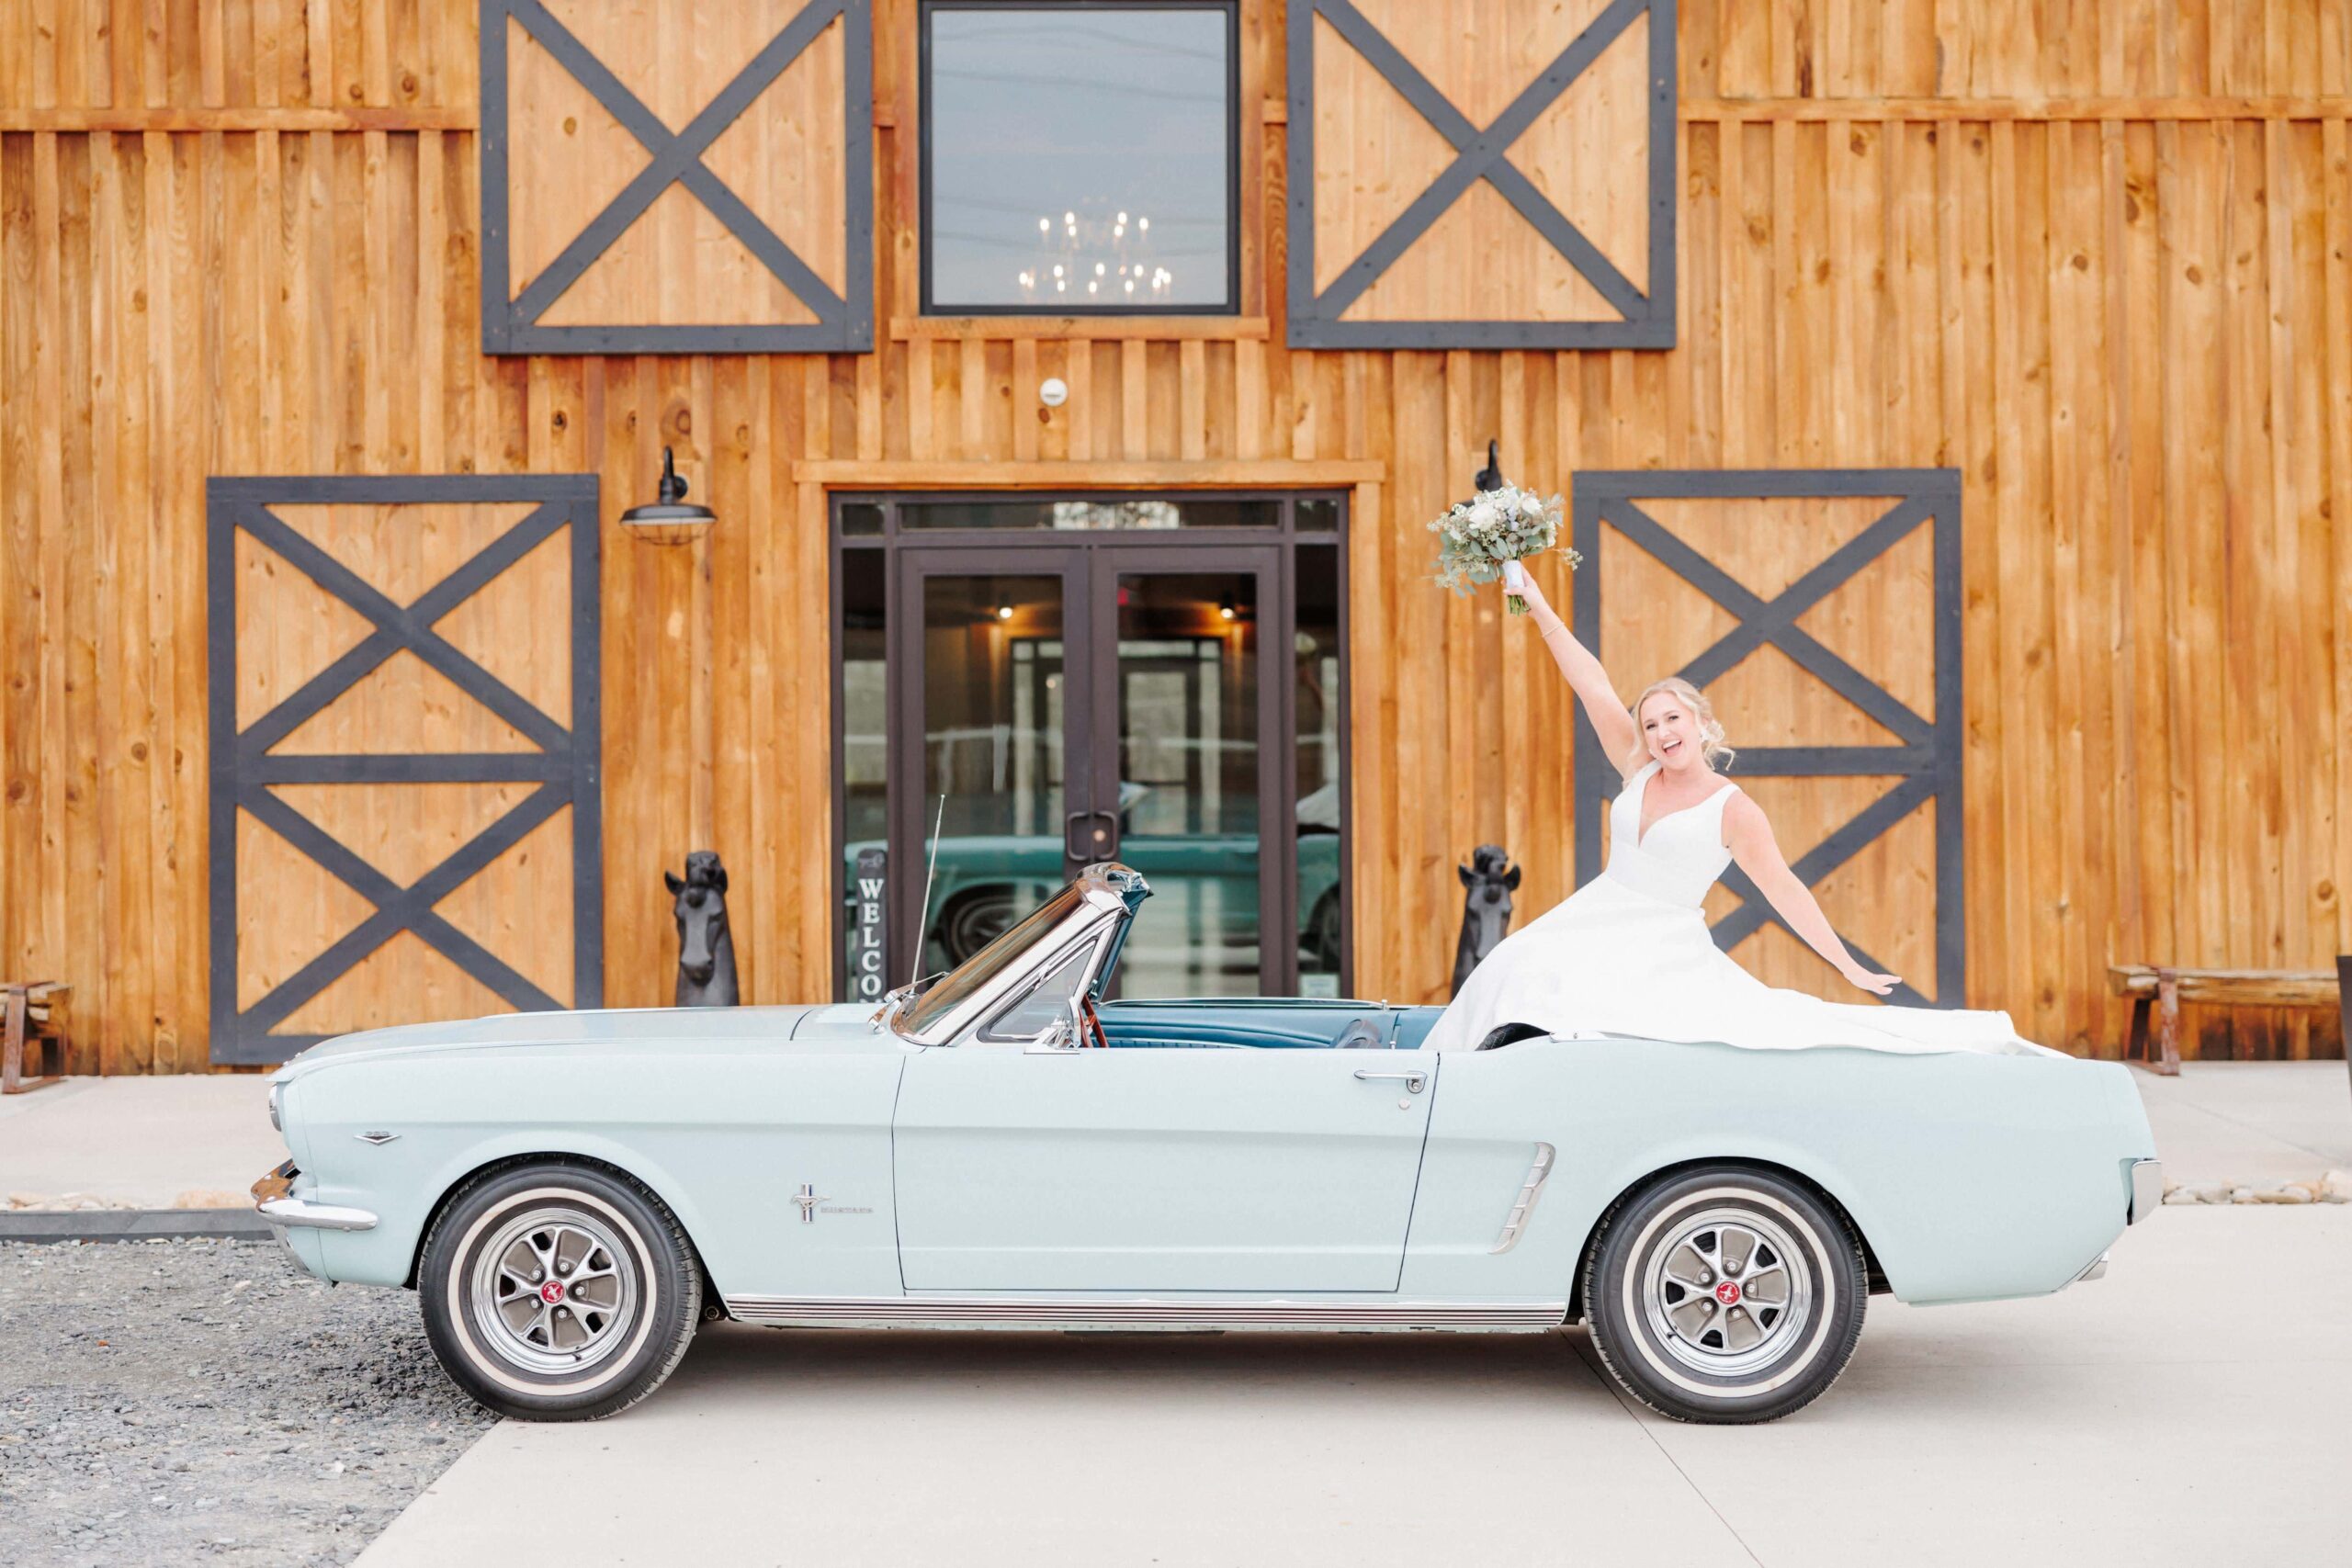 The bride cheers from the back seat of her classic car, throwing her bouquet of flowers up.